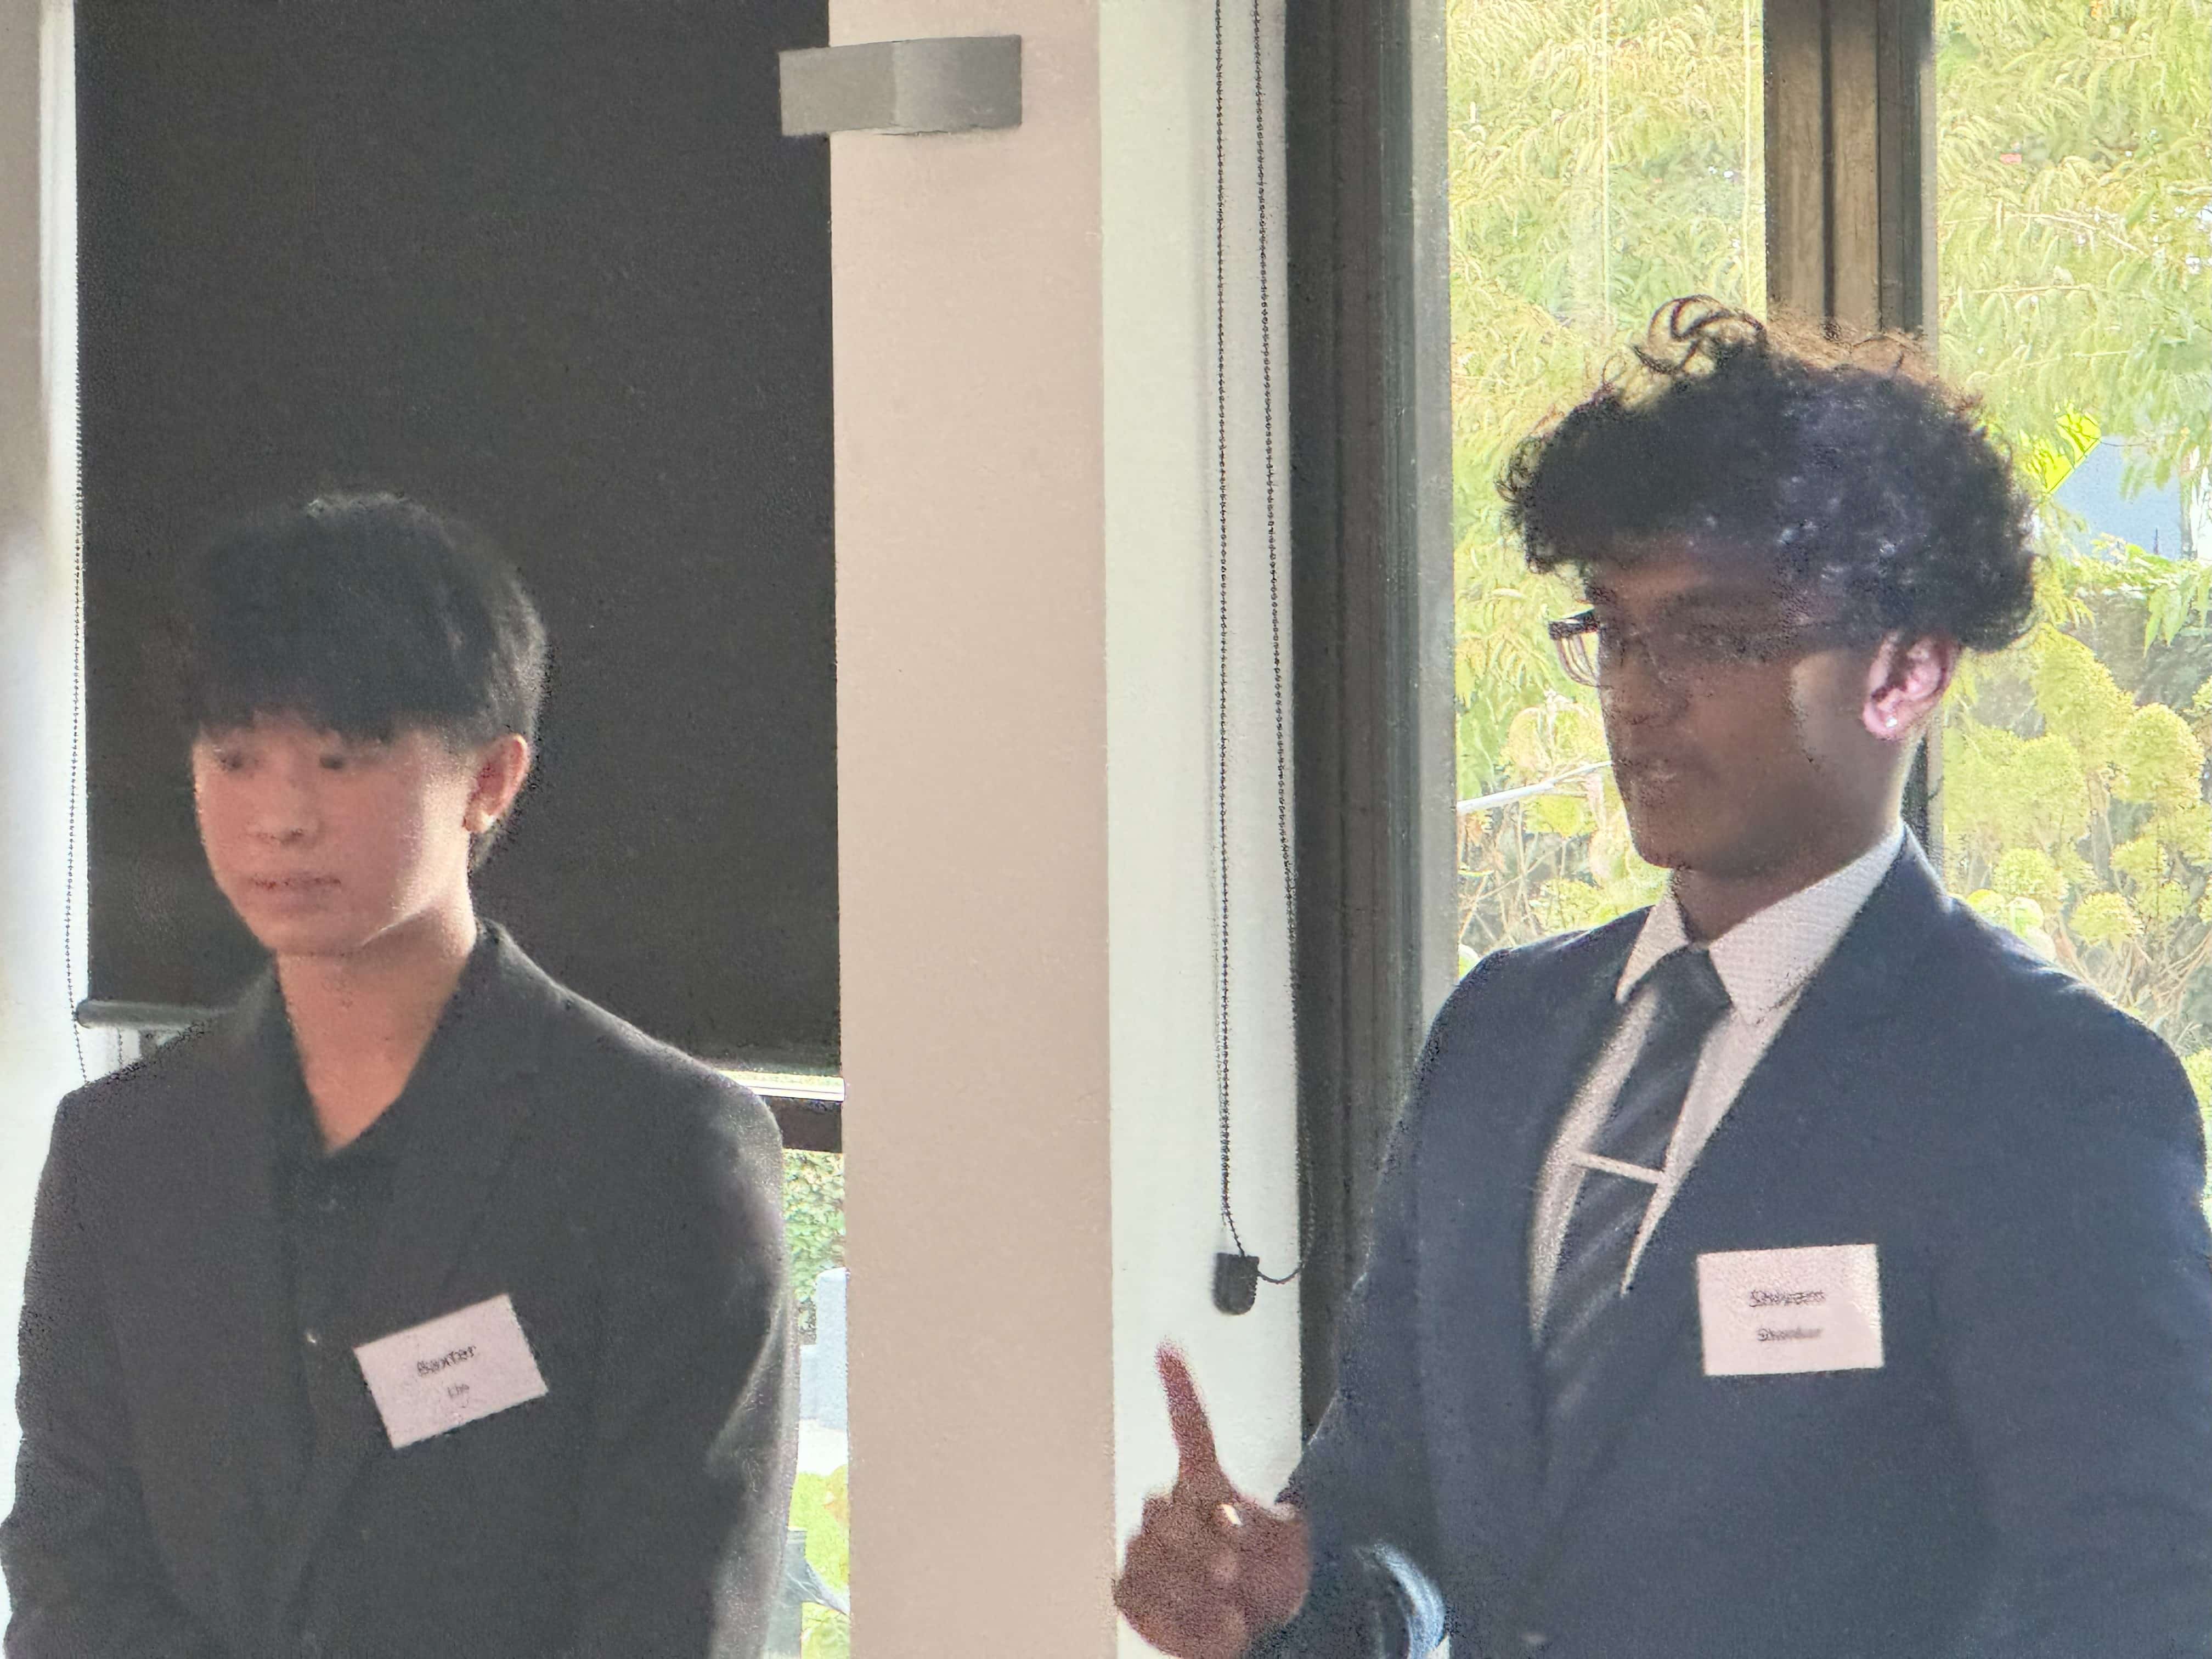 Baxter and Shiva 2024 Rotary Science and Technology forum giving feedback on their experiences to Club Meetings